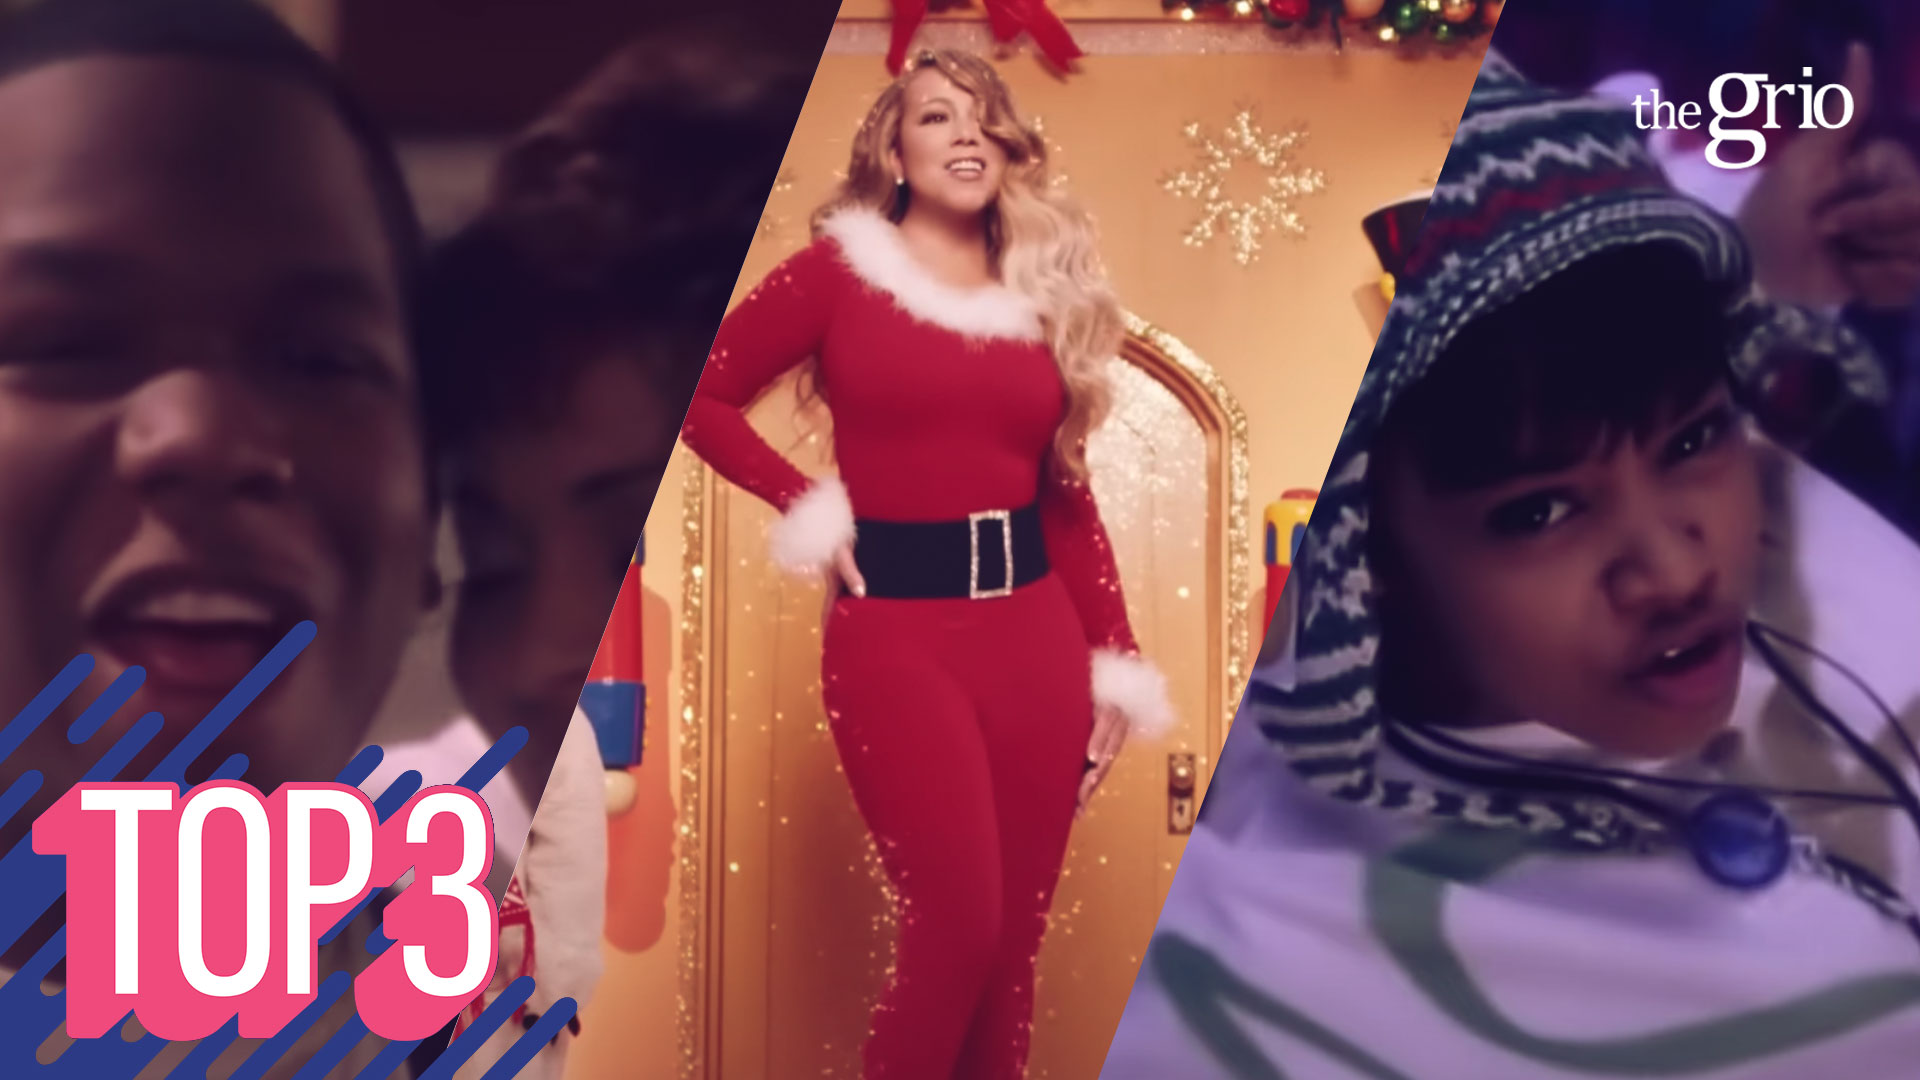 Watch: theGrio Top 3 | What are the Top 3 songs to play at a Christmas party?